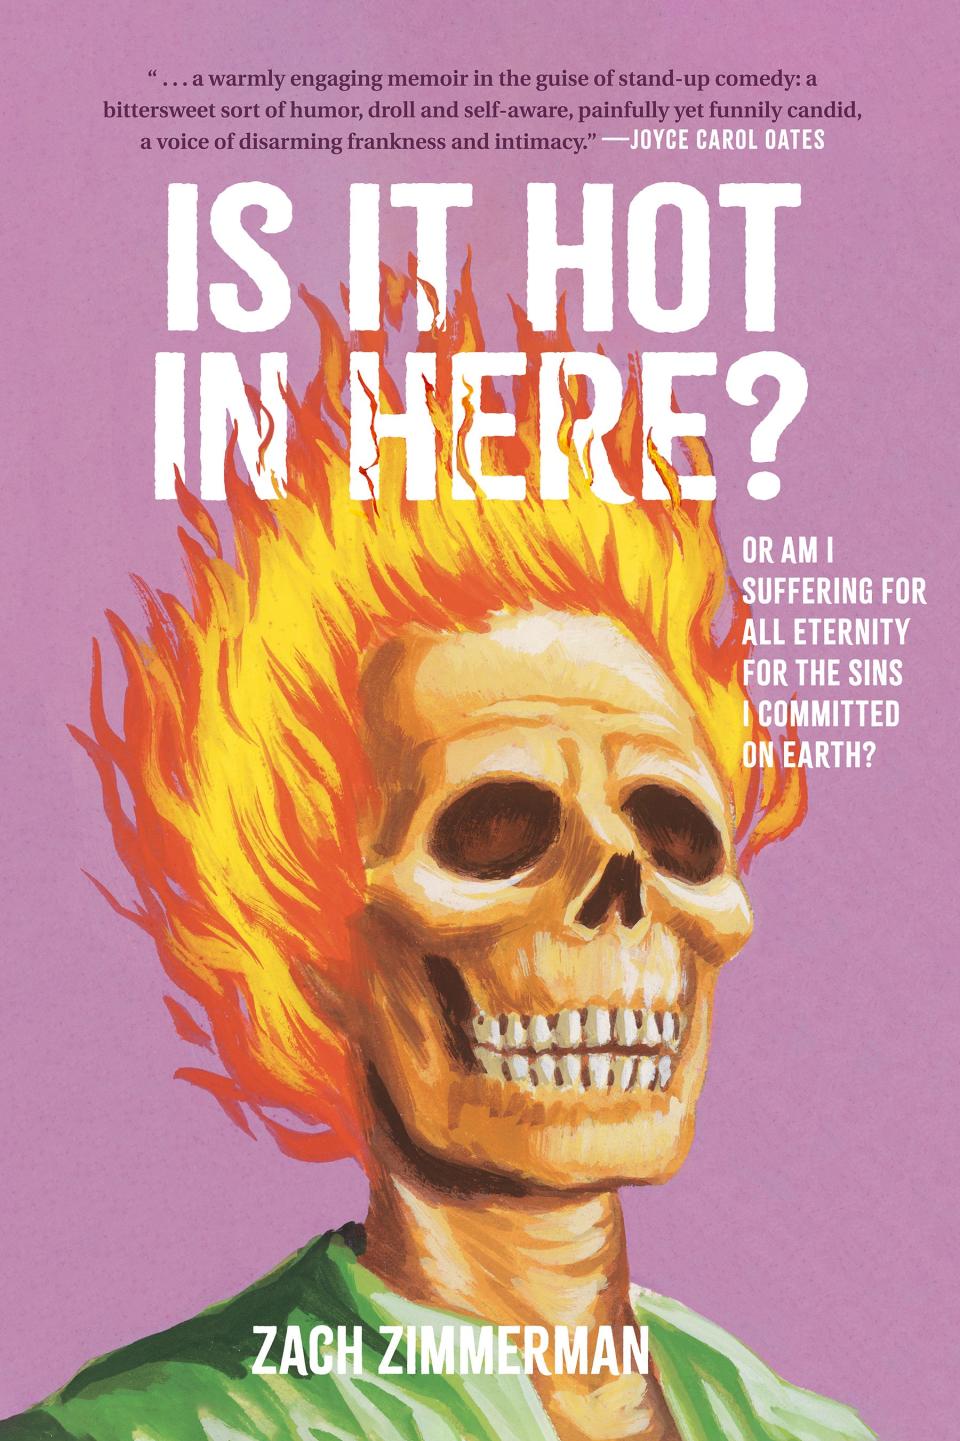 “Is It Hot in Here (Or Am I Suffering for All Eternity for the Sins I Committed on Earth)?” by Zach Zimmerman